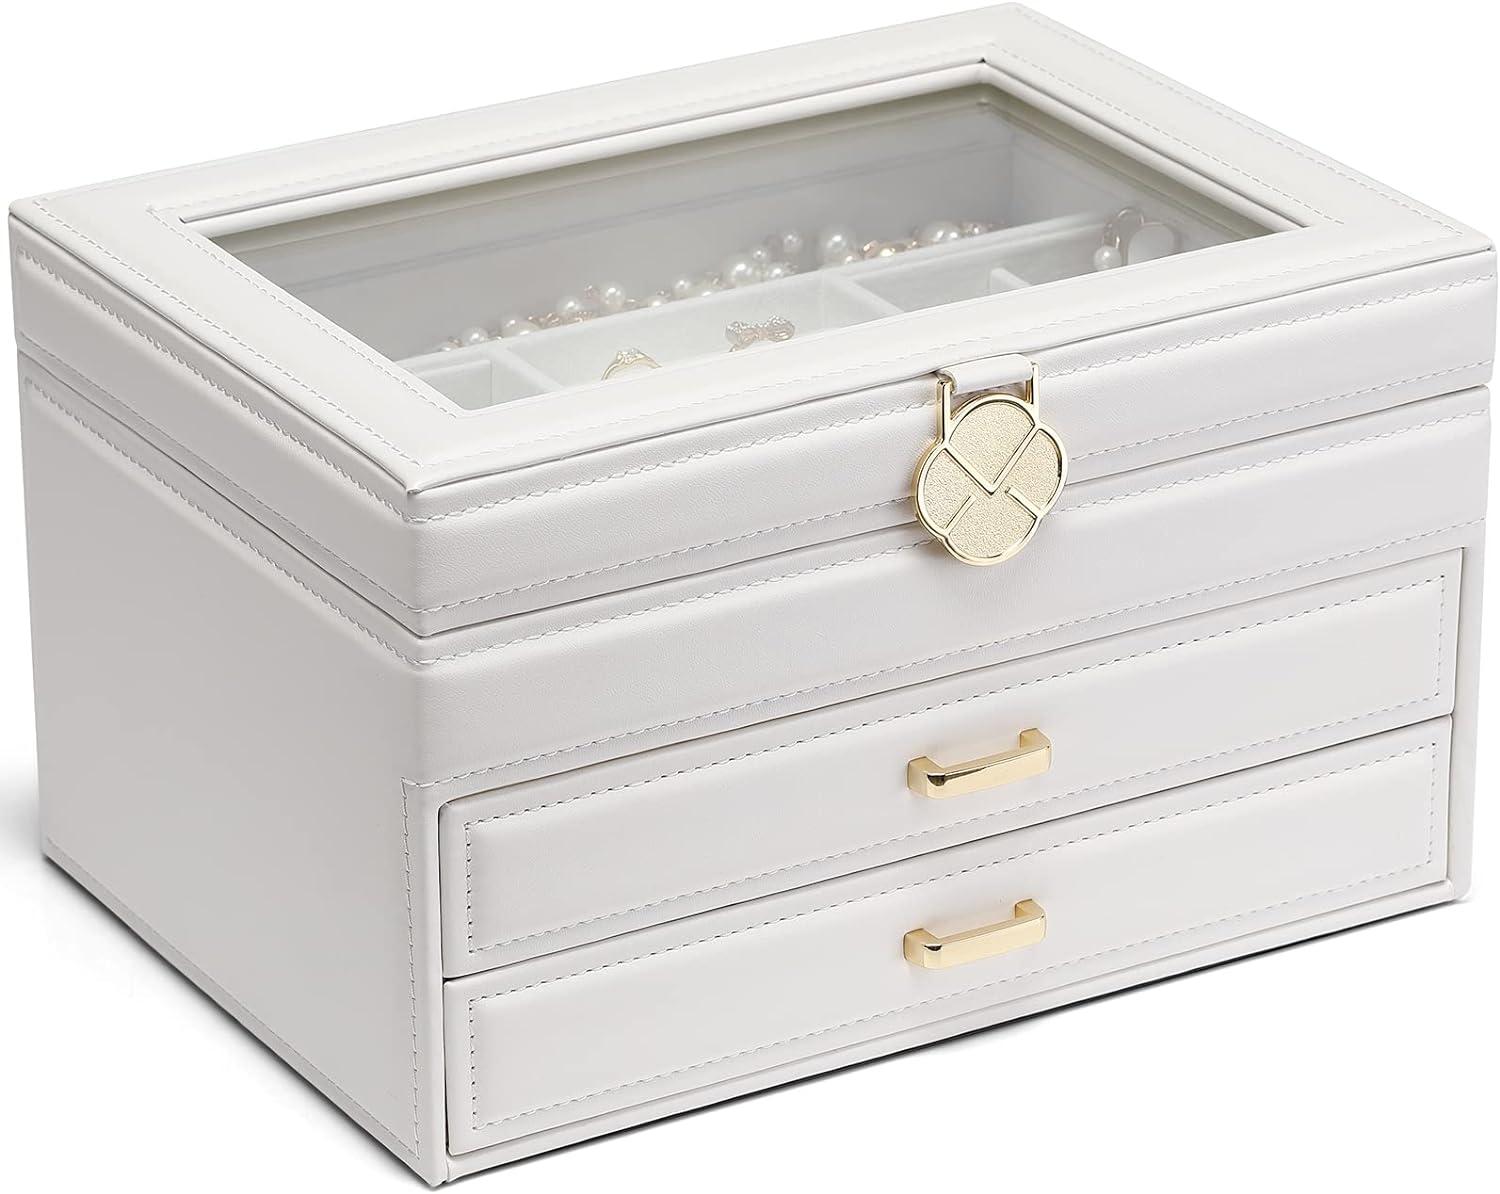 Vlando 6 Tier Large Jewelry Box for Women - Big Jewelry Organizer with Mirror, Jewelry Box Organizer for Drawer Necklace Ring Bracelet and Watch, Christmas Gift for Loved Ones - White